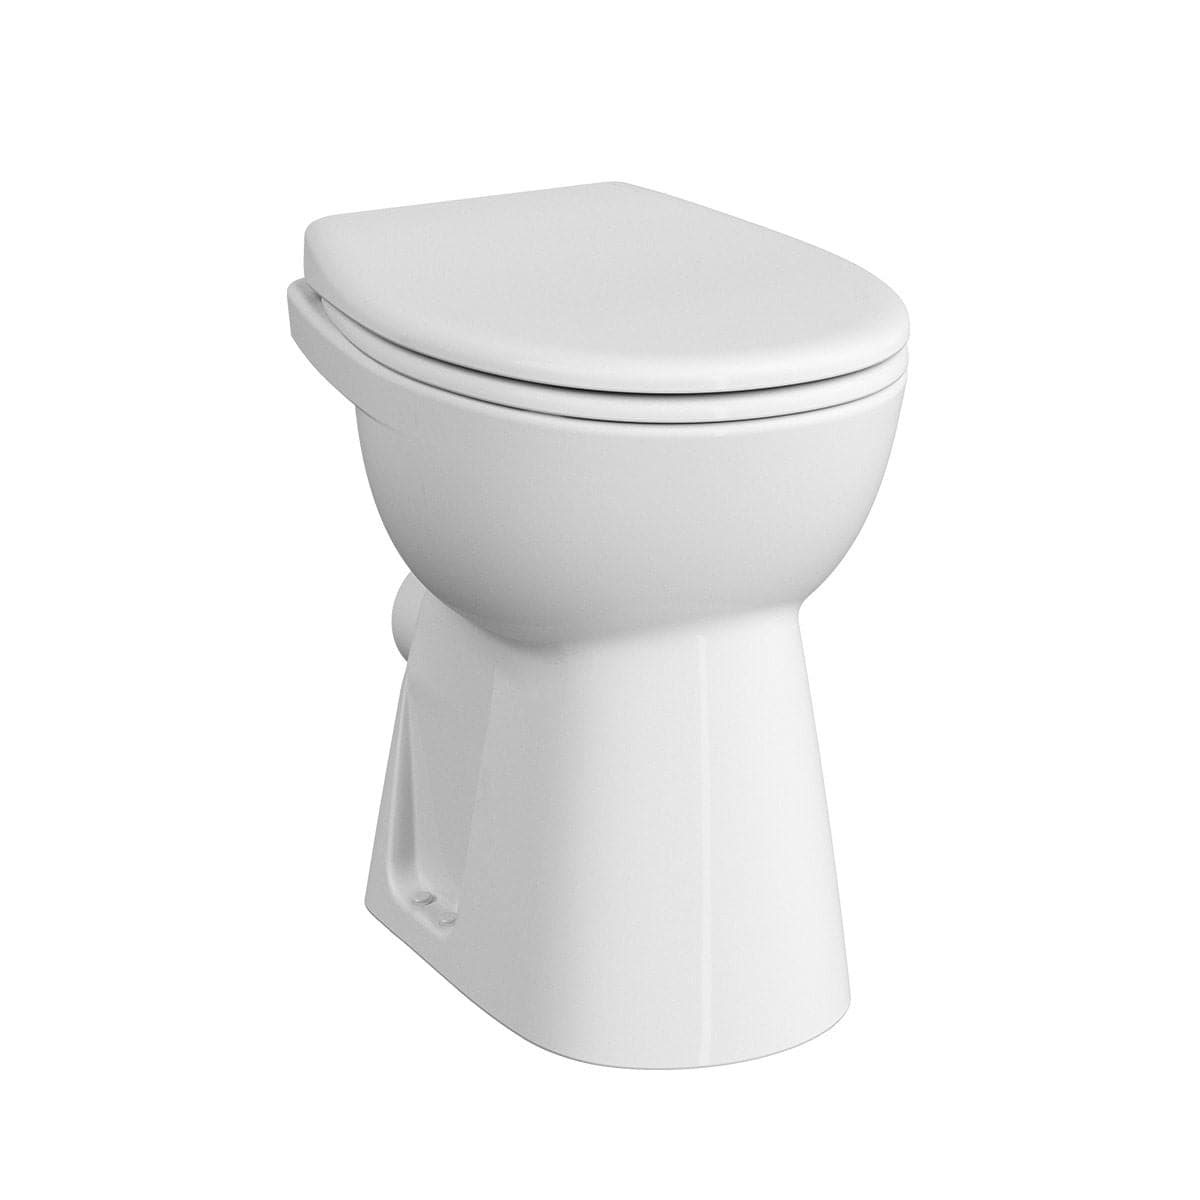 VitrA WC Conforma Barrierefrei Stand 46 cm inkl. Bidetfunktion-Weiss